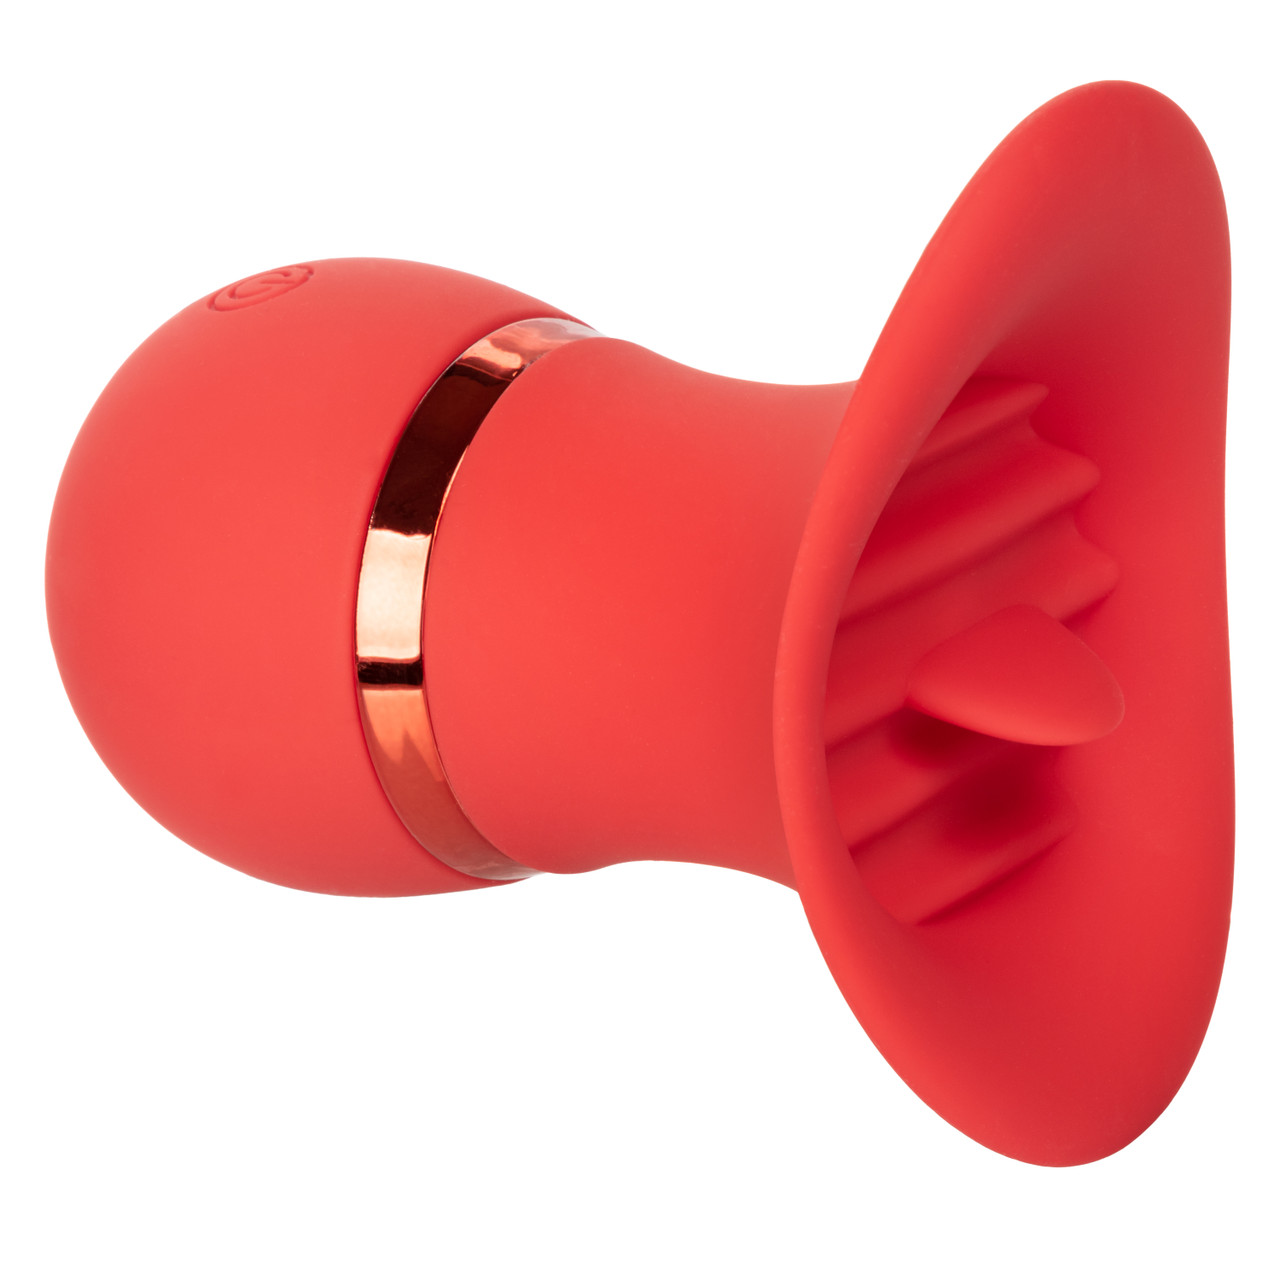 French Kiss Suck & Play Rechargeable Waterproof Silicone Interchangeable  Set By CalExotics - Red